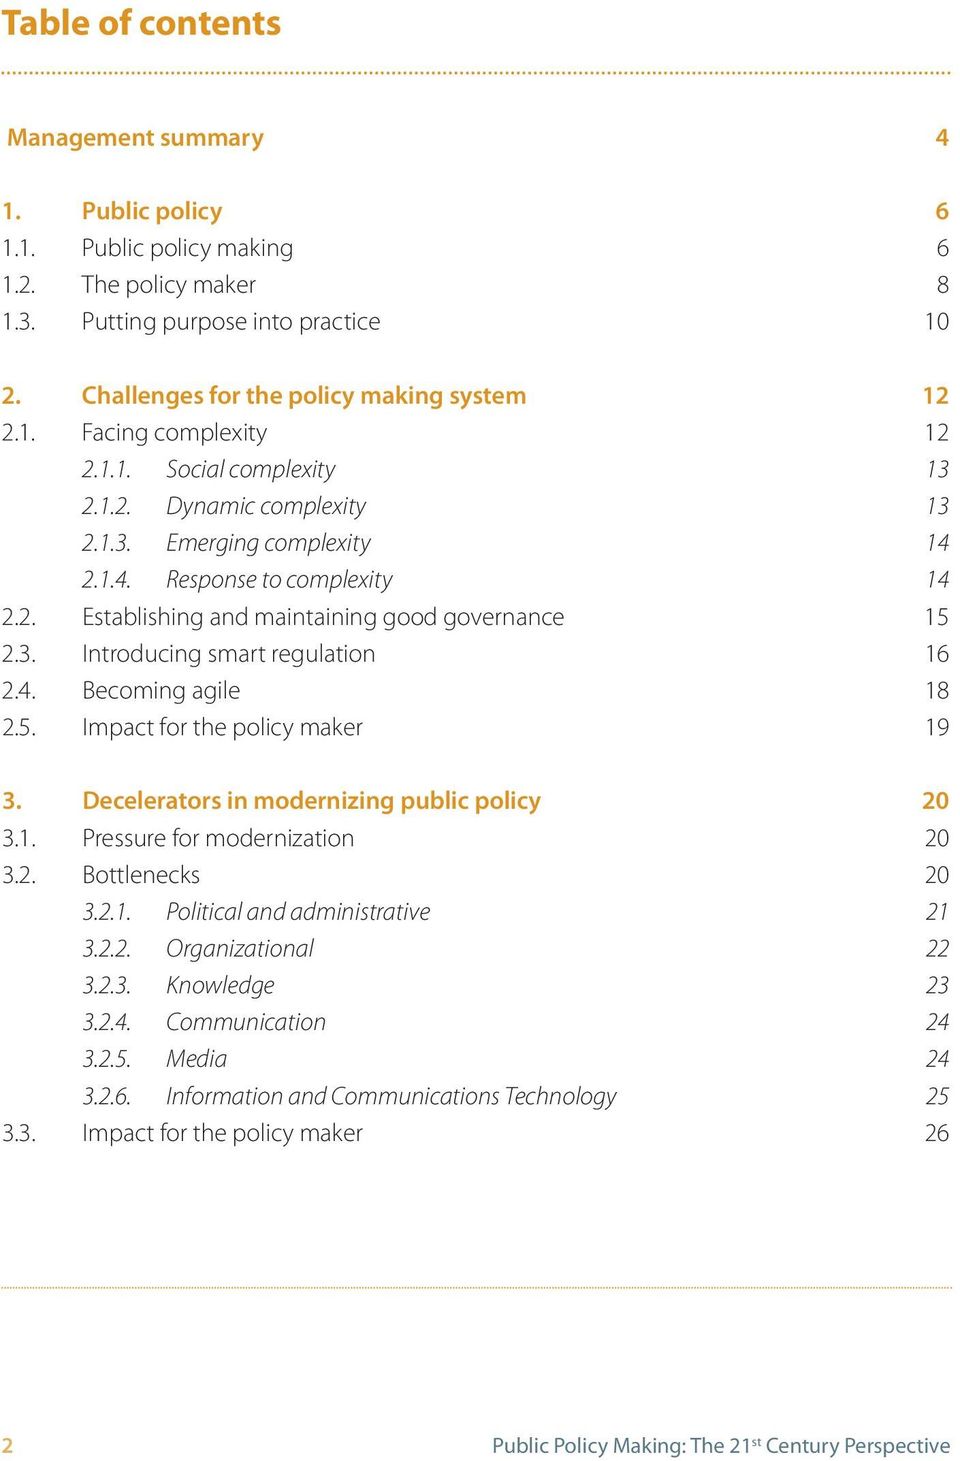 4. Becoming agile 18 2.5. Impact for the policy maker 19 3. Decelerators in modernizing public policy 20 3.1. Pressure for modernization 20 3.2. Bottlenecks 20 3.2.1. Political and administrative 21 3.